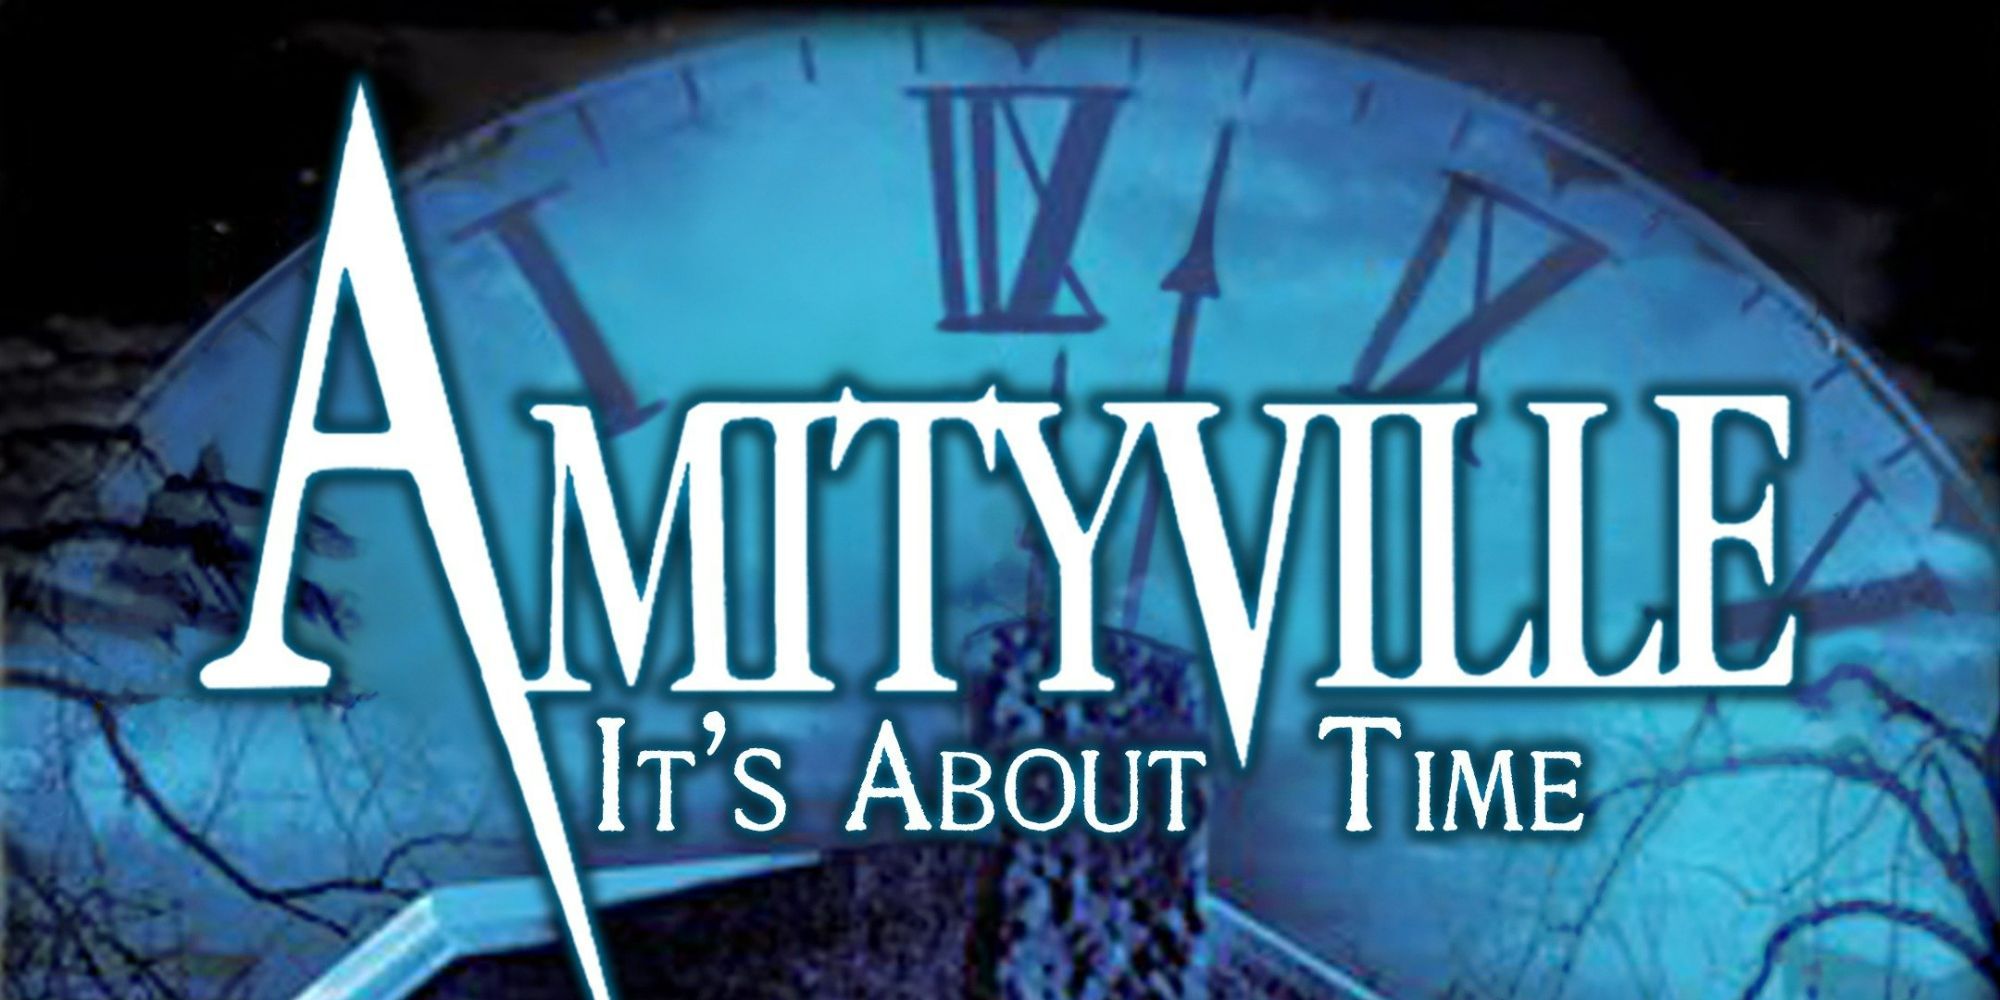 The title card for Amityville: It's About Time